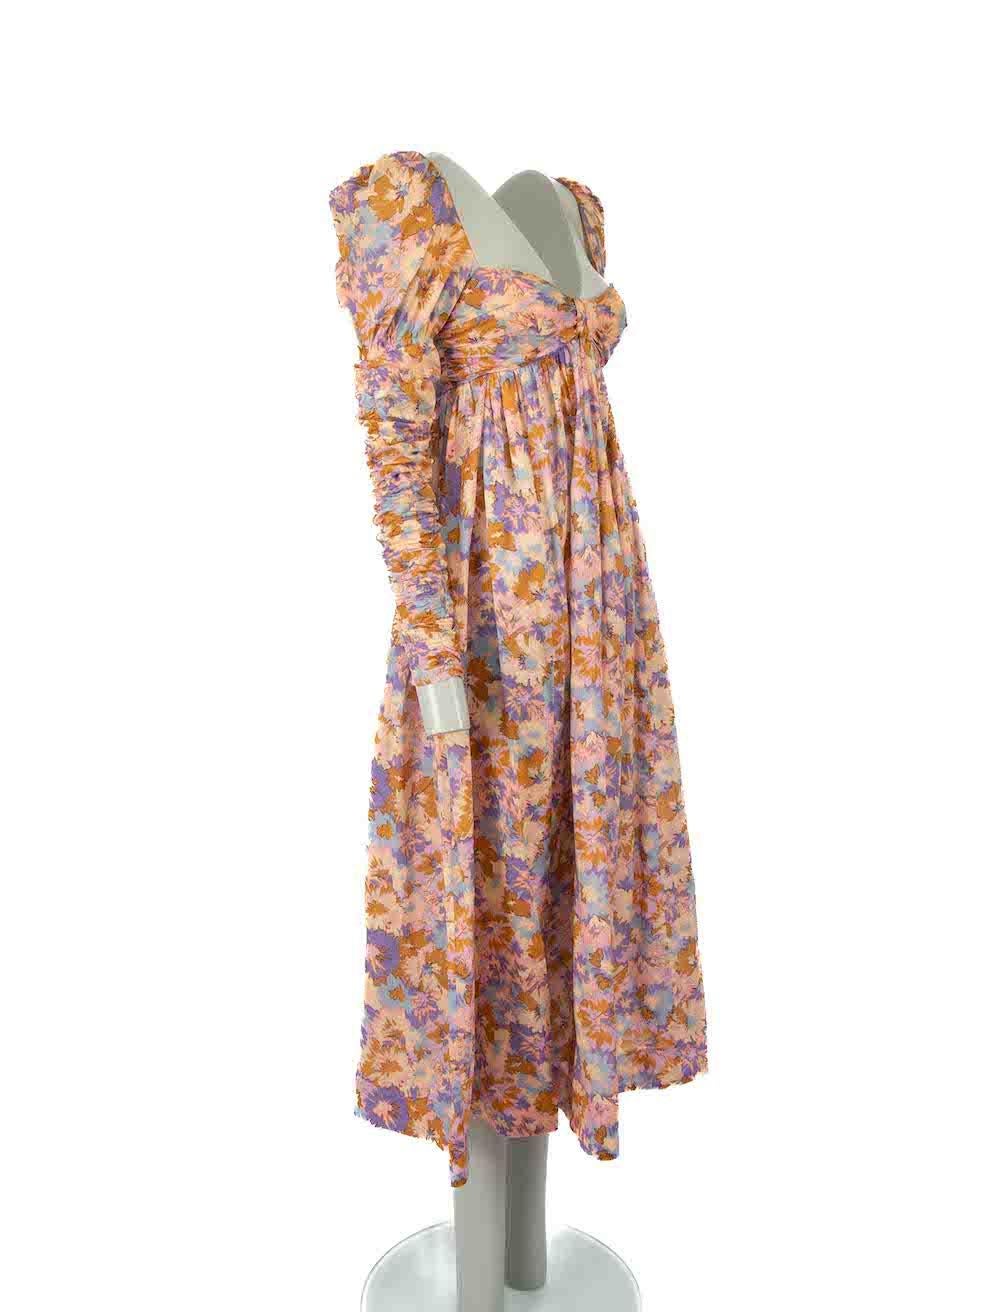 CONDITION is Very good. Minimal wear to dress is evident. Minimal white stains to left sleeve on this used Zimmermann designer resale item.

Details
Multicolour
Cotton
Dress
Floral pattern
Midi
Sweetheart neckline
Ruched long sleeves
2x Side